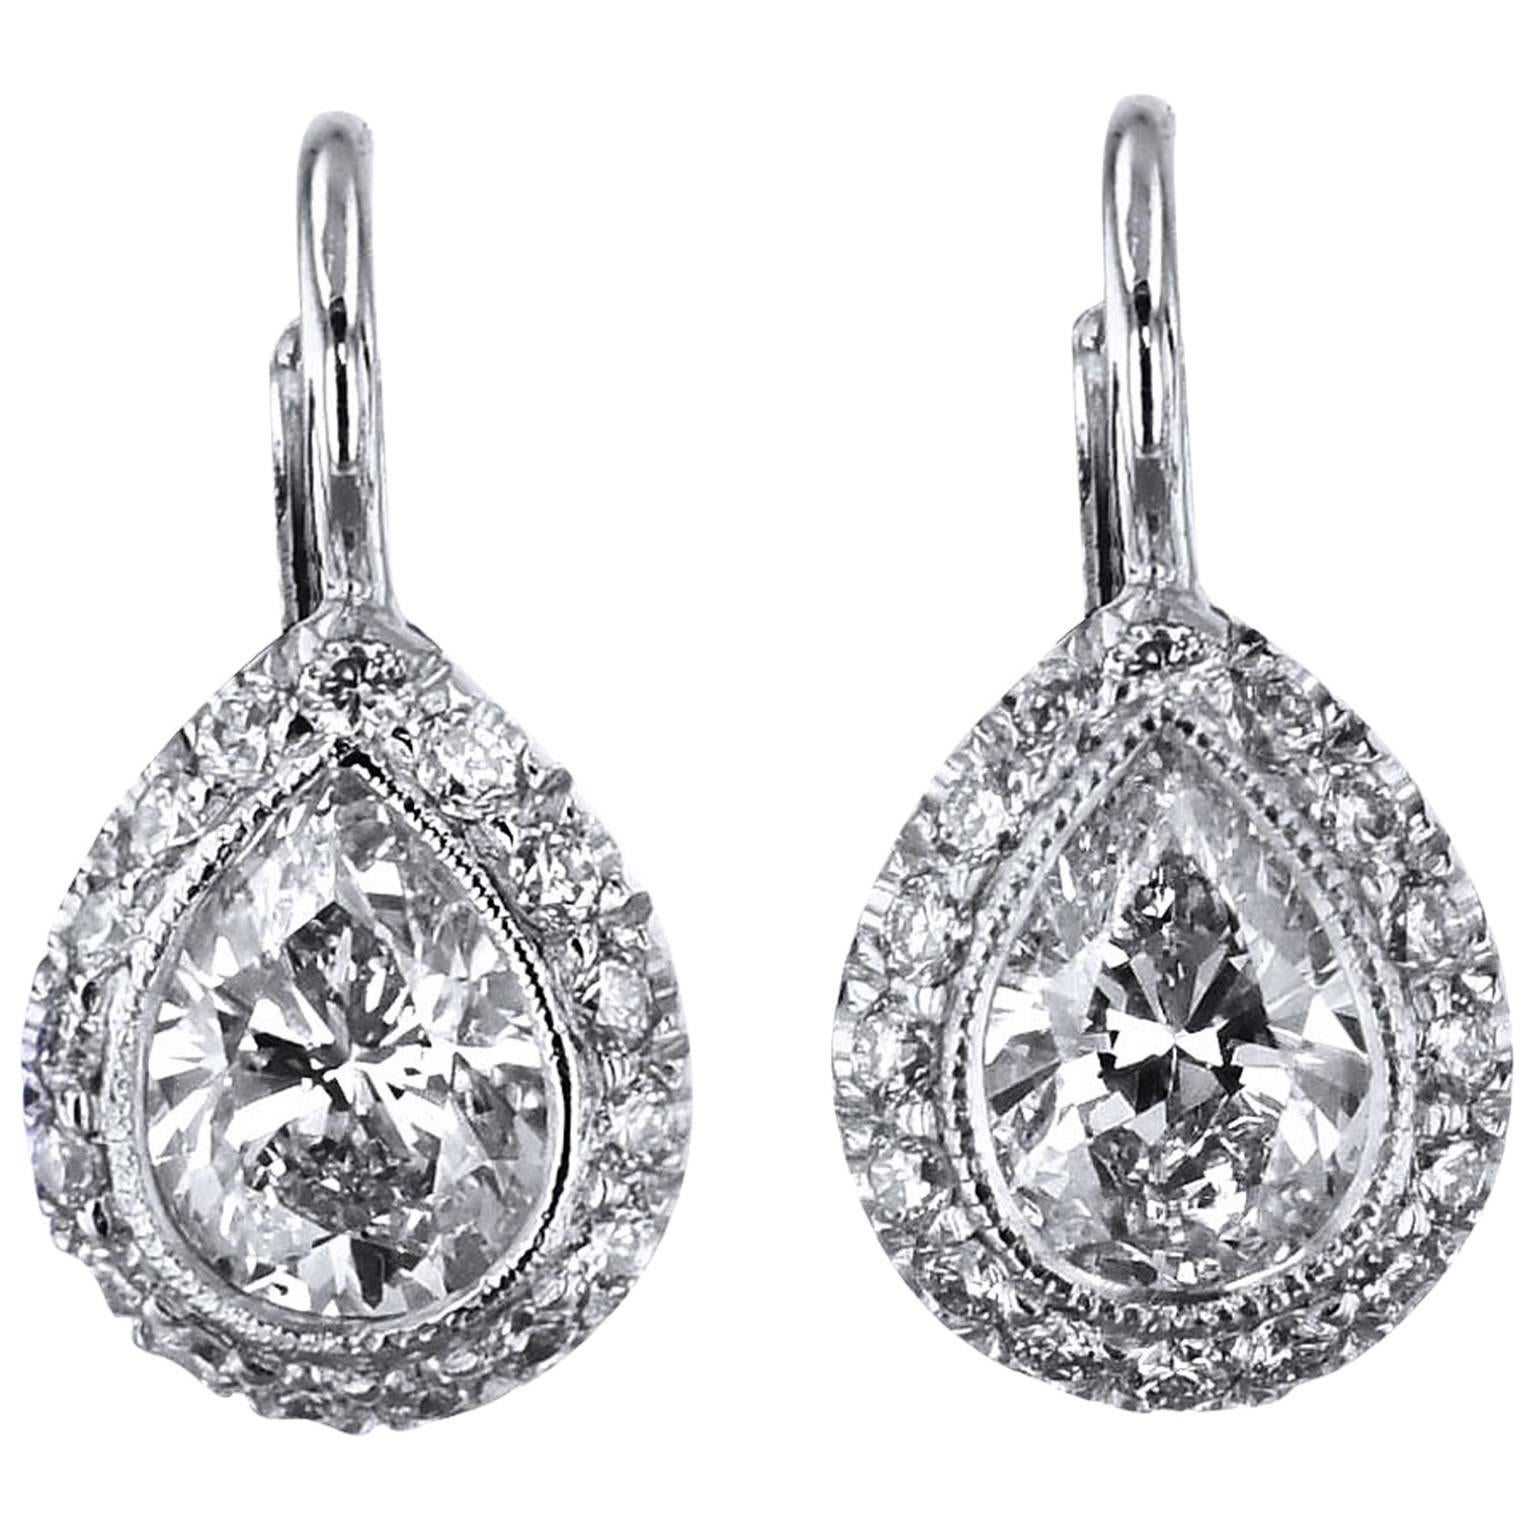 1.06 Carat Pear Shaped and Pave Set Diamonds in 18 kt Gold Lever-Back Earrings